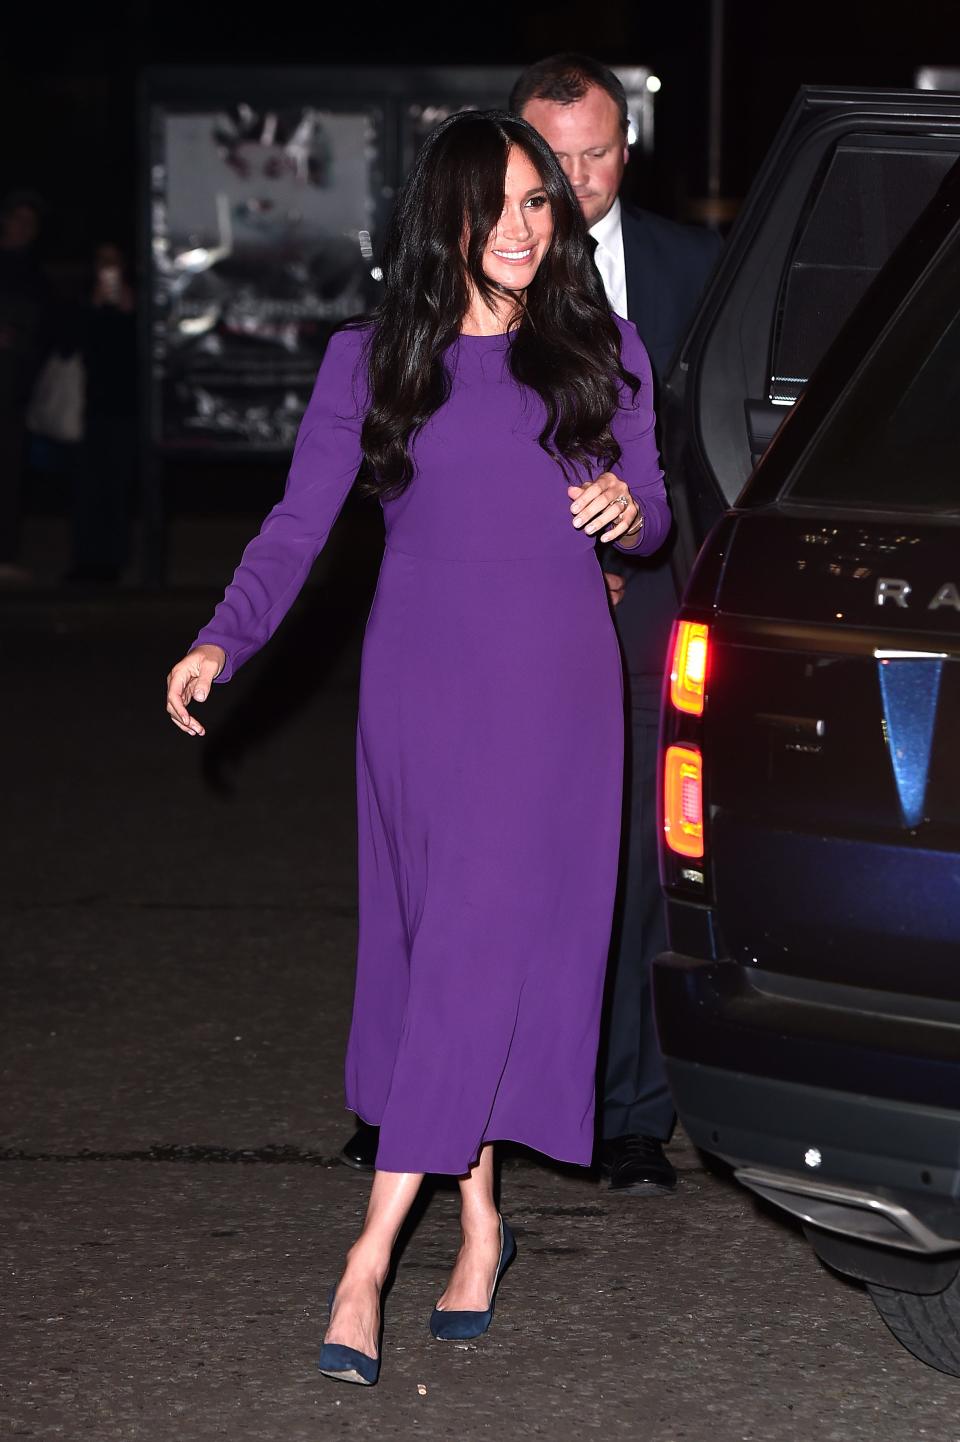 Duchess Meghan of Sussex arriving at the One Young World Summit at Royal Albert Hall on Oct. 22, 2019 in London.